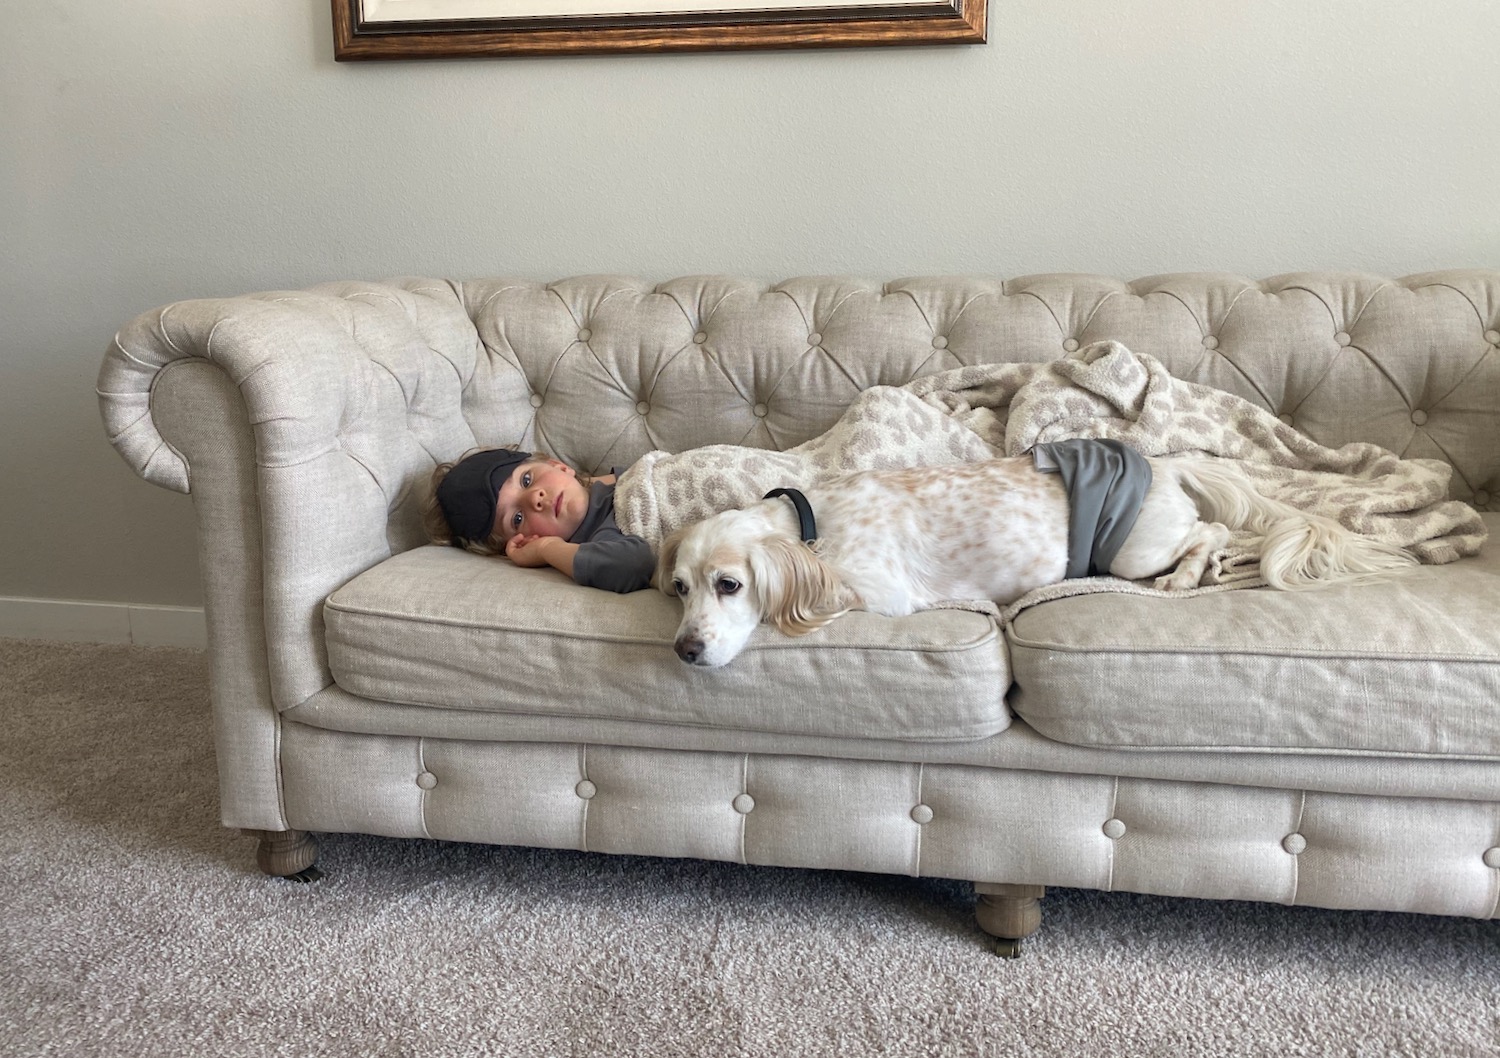 a child lying on a couch with a dog